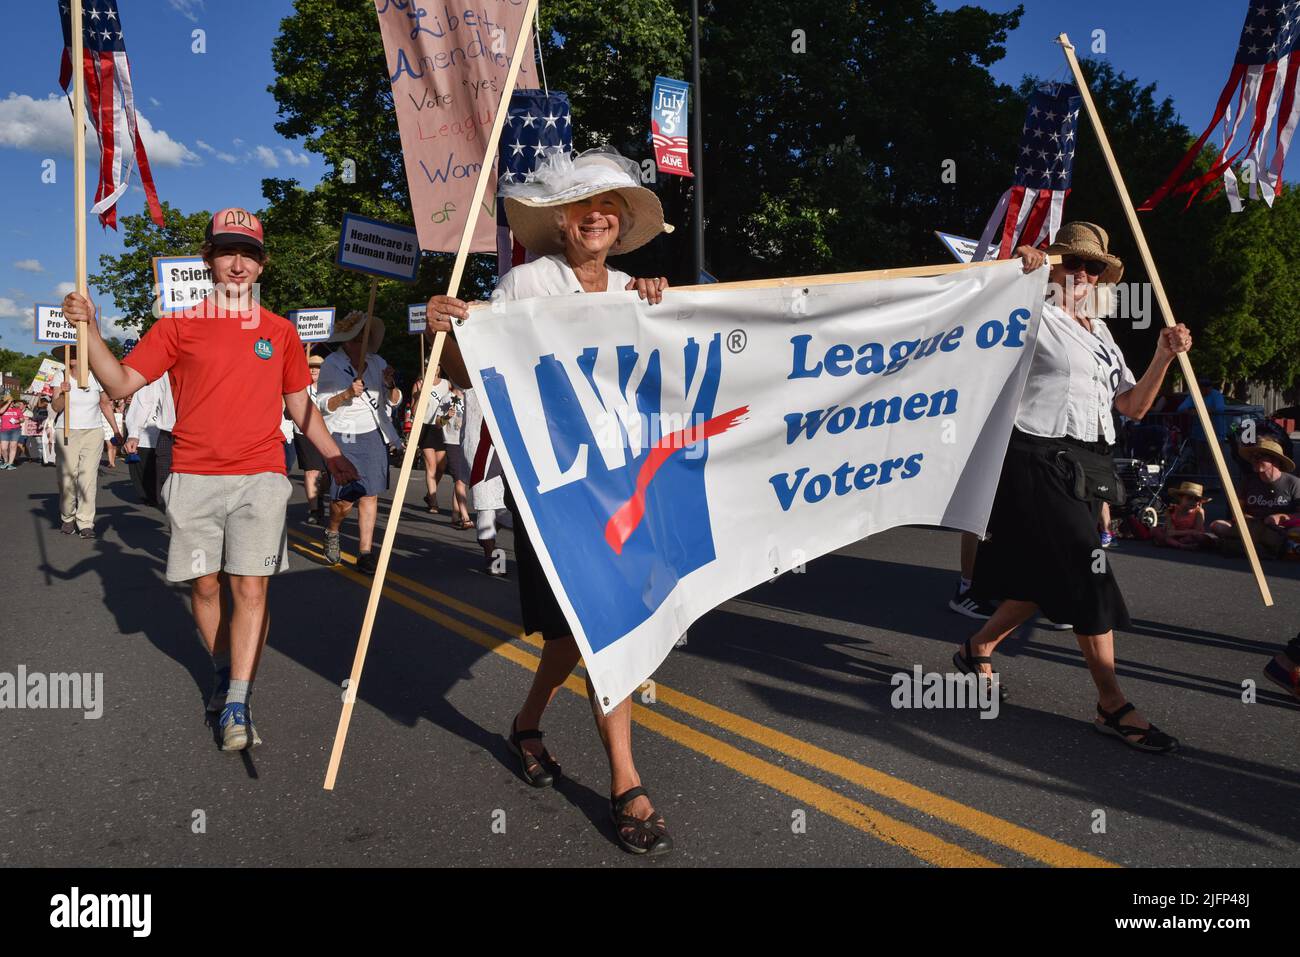 League of Women Voters marchers in July 4 parade, Montpelier, VT, USA. Sign refers to amendment to enshrine abortion rights in Vermont constitution. Stock Photo